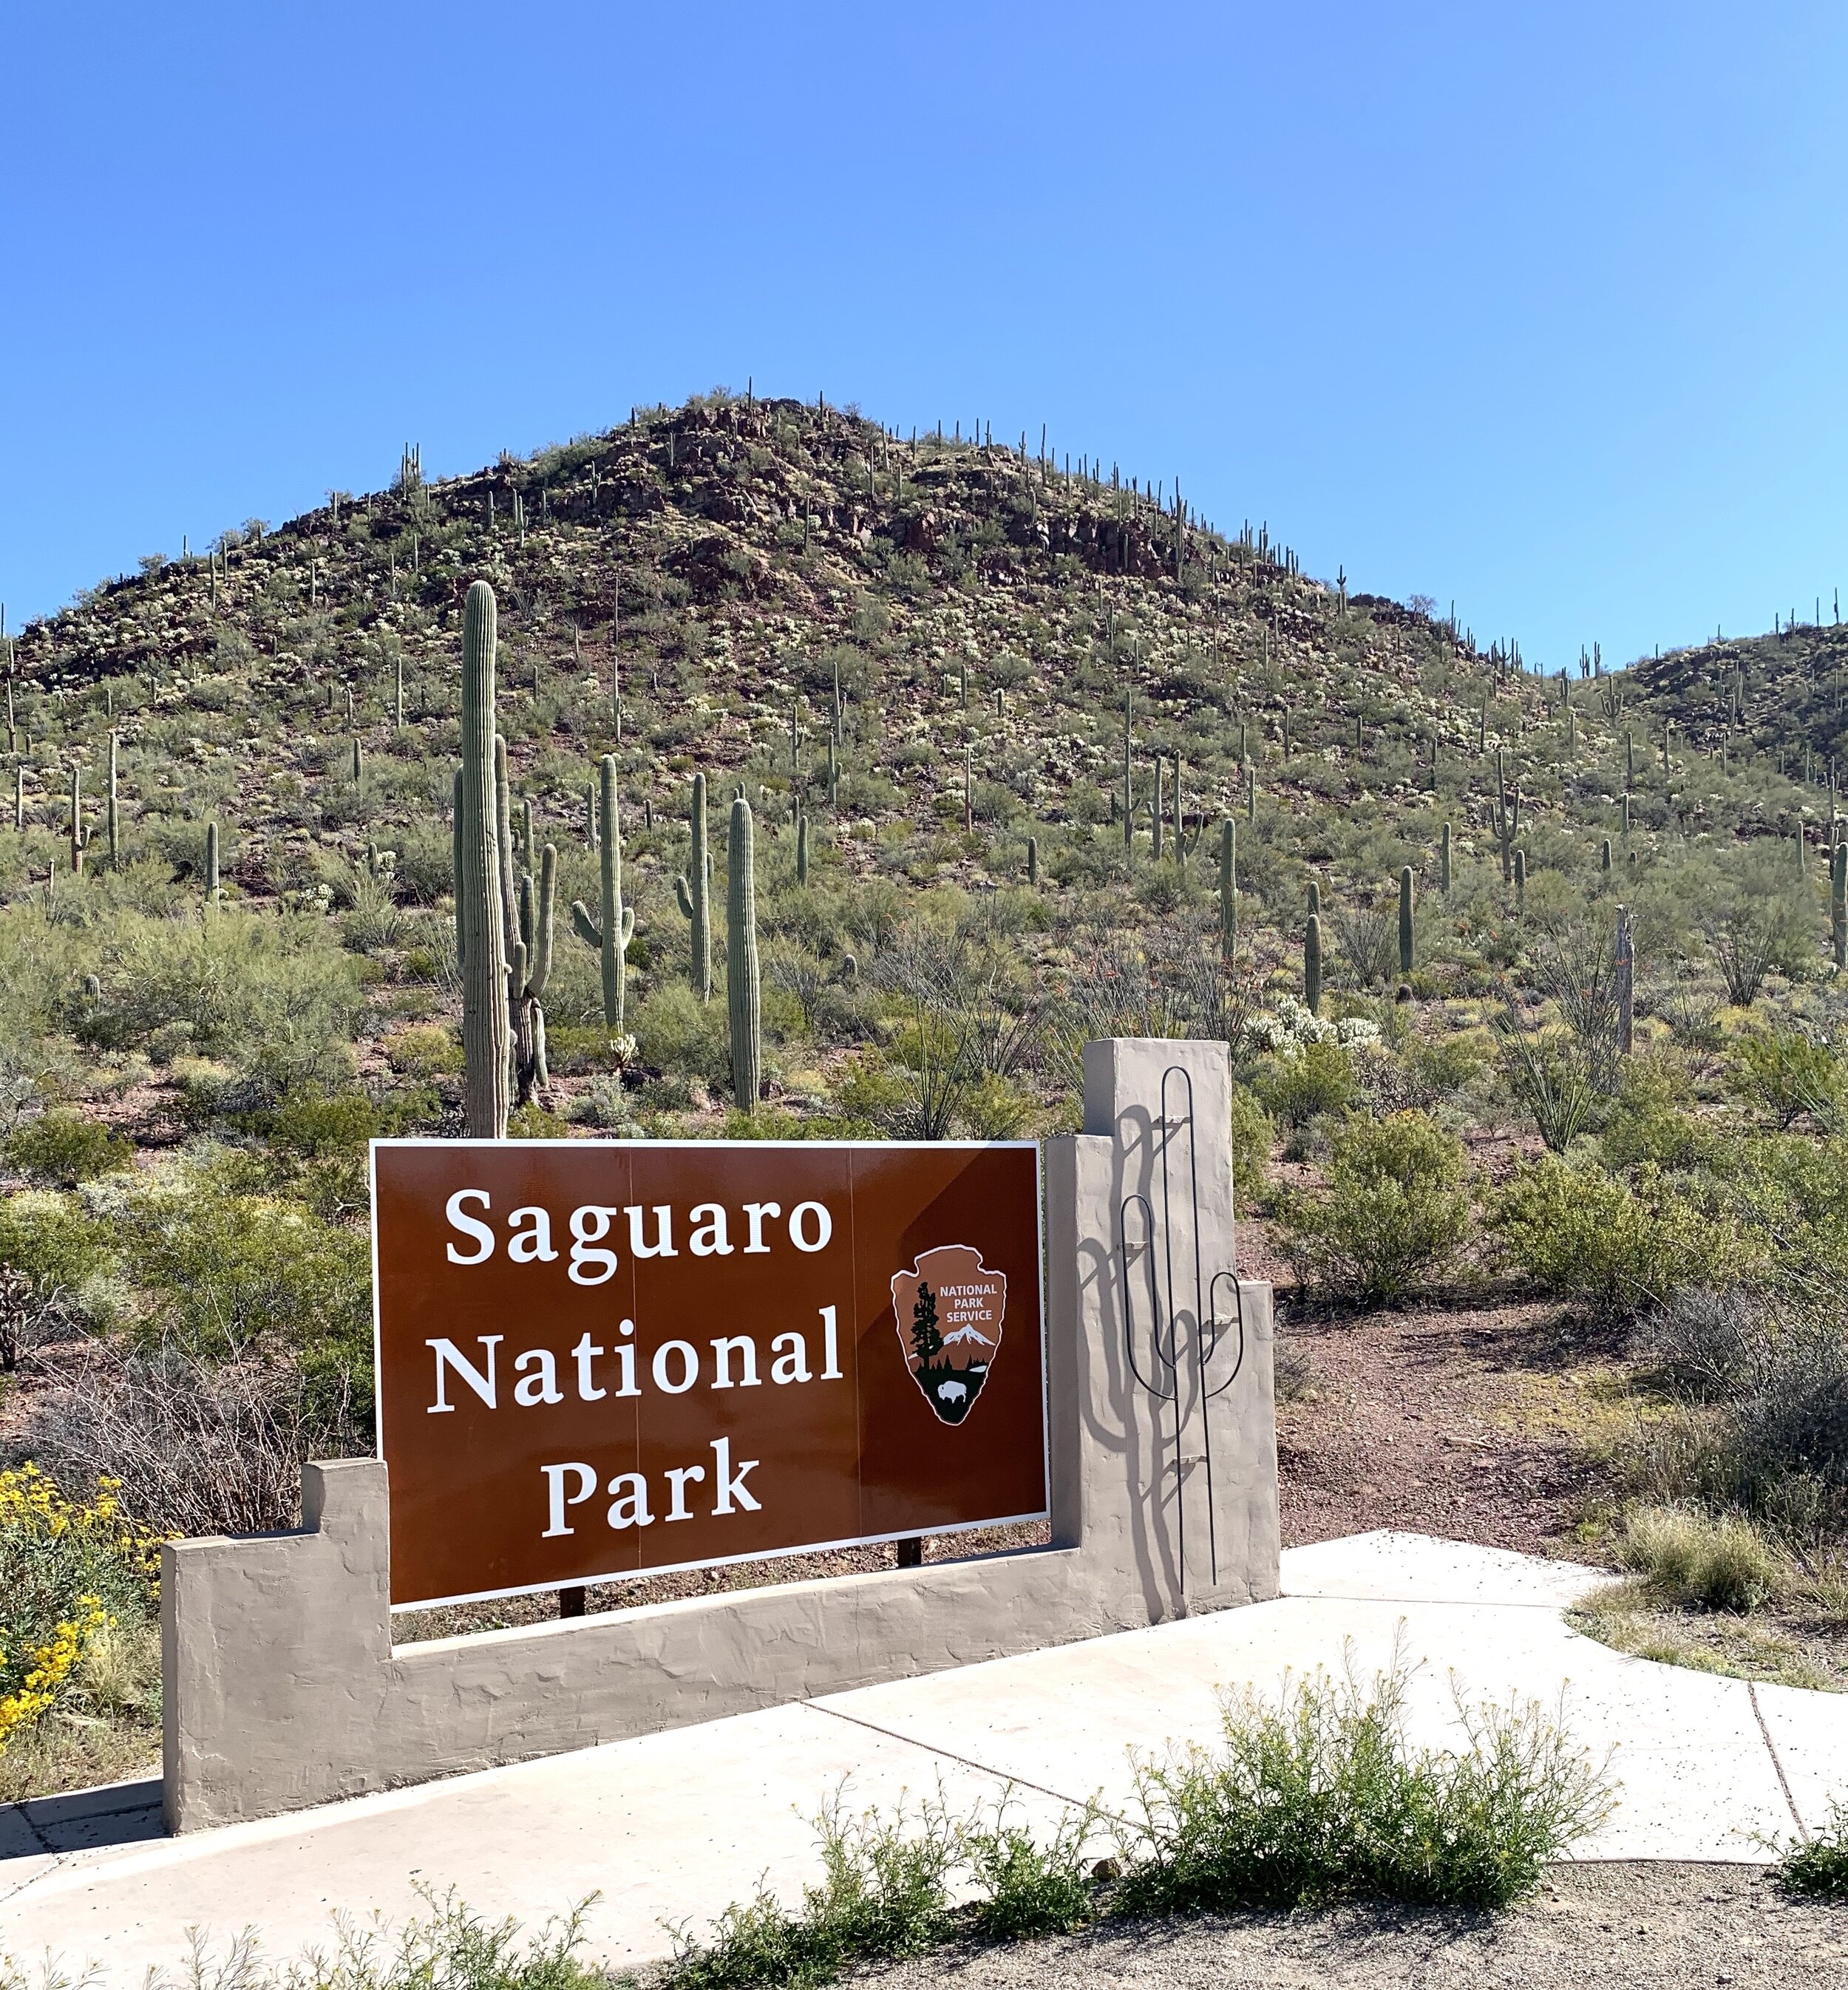  The Saguaro National Park was just a few miles from our campground so we had the opportunity to check out another one of America’s great National Parks. 